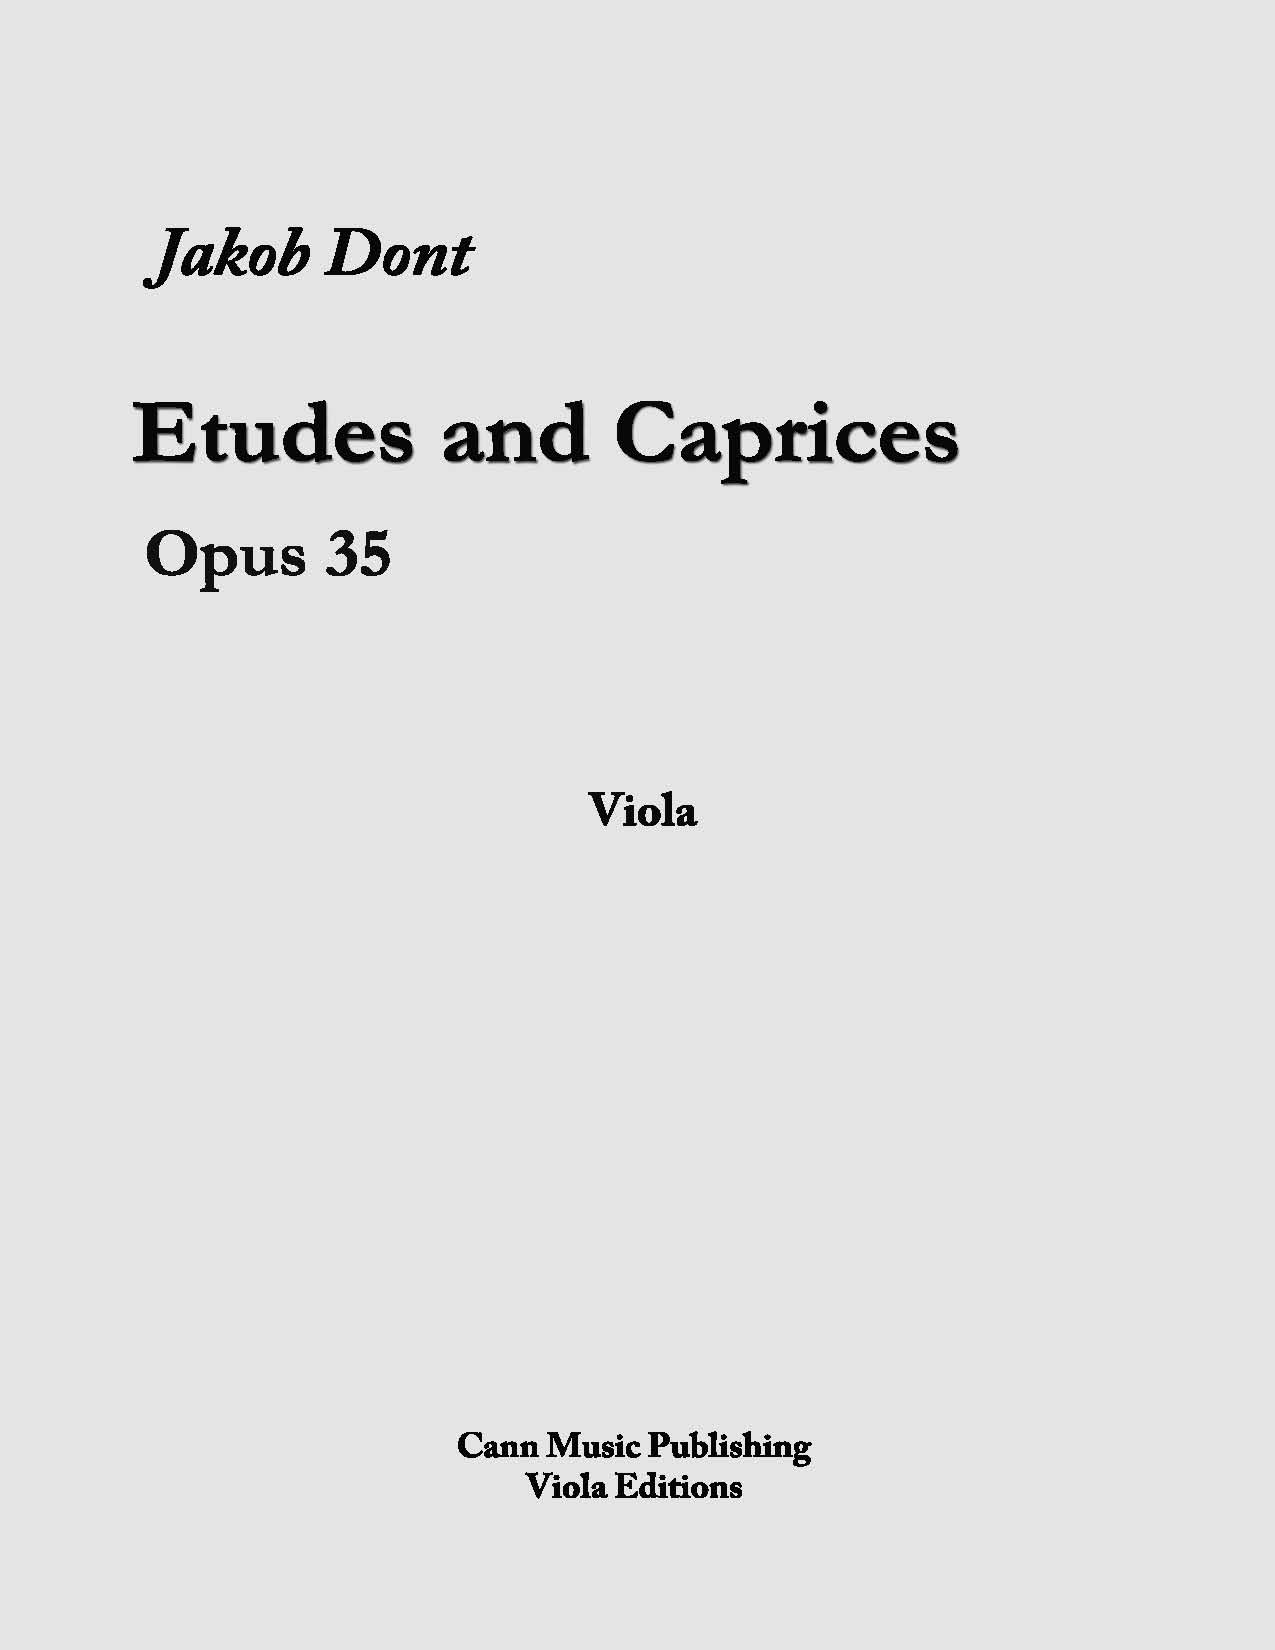 Jakob dont berkley 24 etudes and caprices for the violin